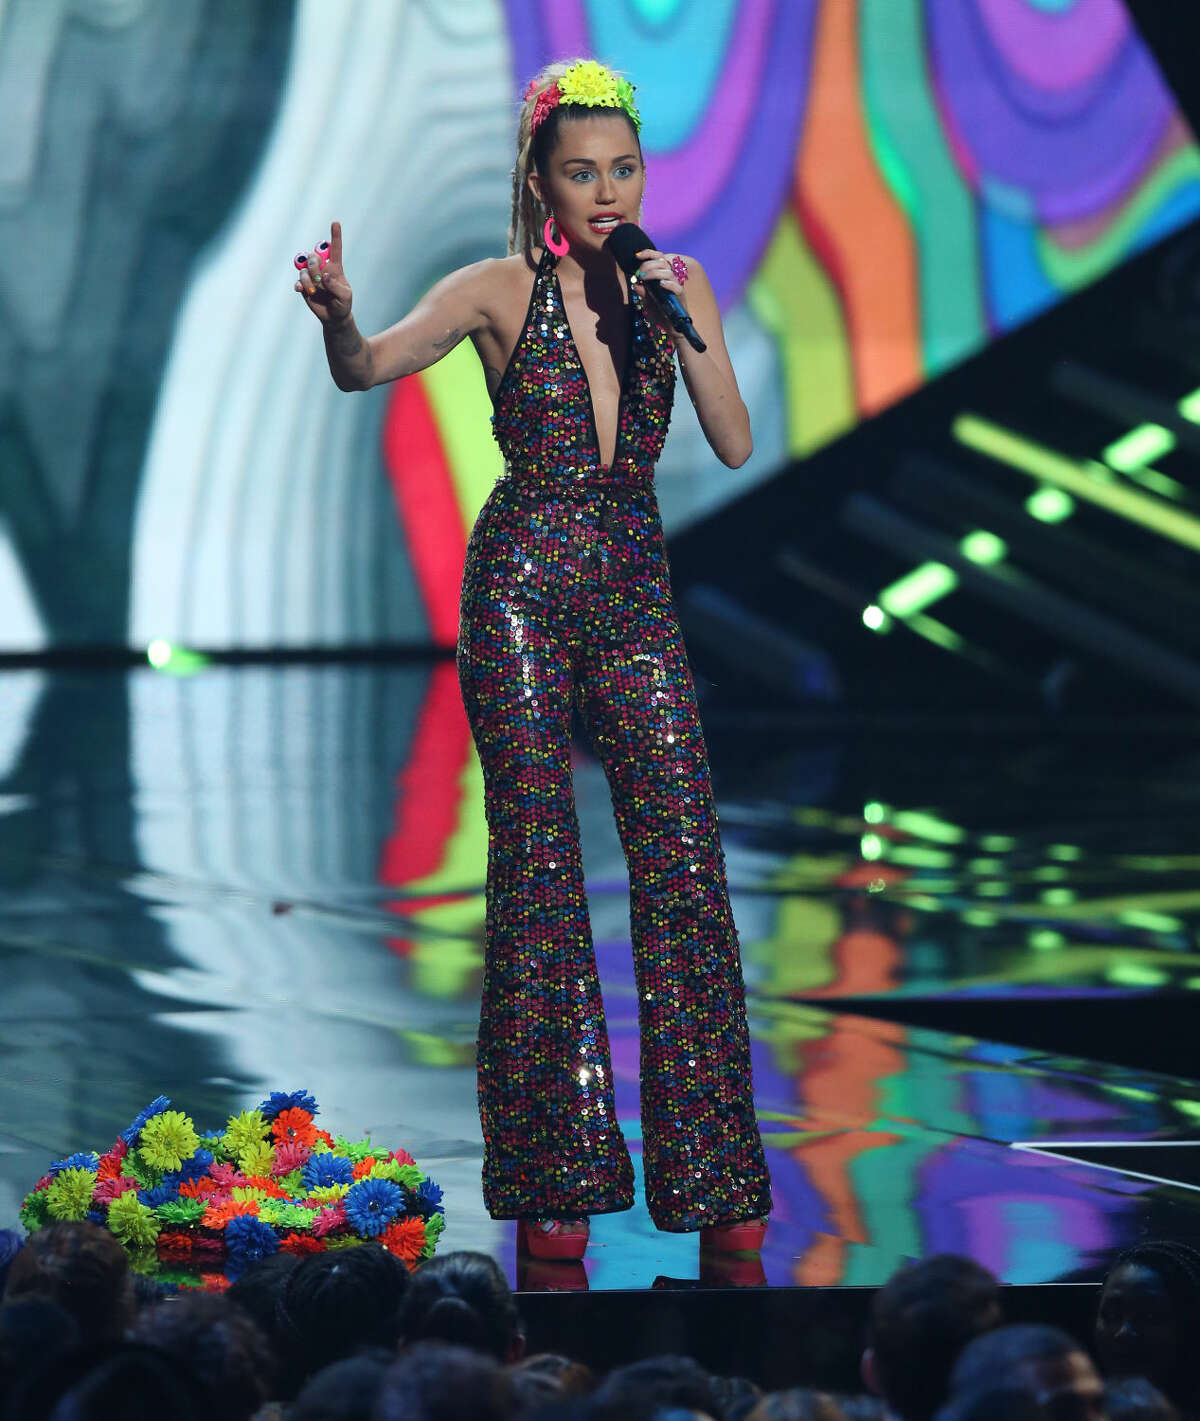 Host Miley Cyrus speaks at the MTV Video Music Awards at the Microsoft Theater on Sunday, Aug. 30, 2015, in Los Angeles. (Photo by Matt Sayles/Invision/AP)